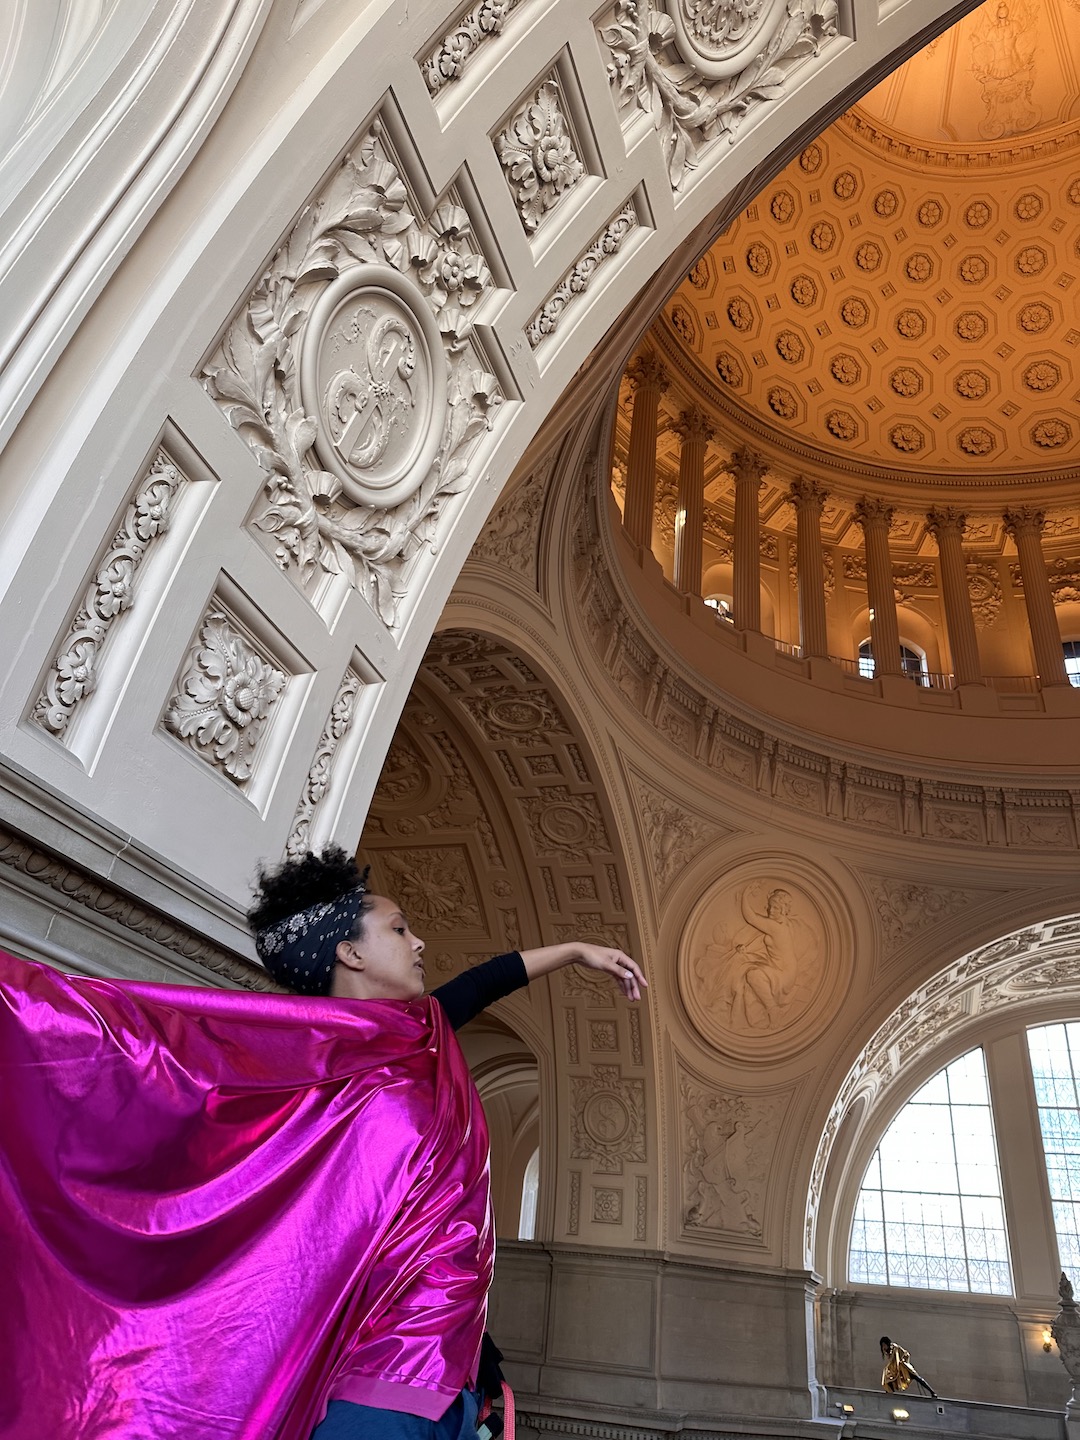 A caramel-colored Black woman draped in shiny fuchsia fabric gestures gracefully amidst neoclassical architecture.